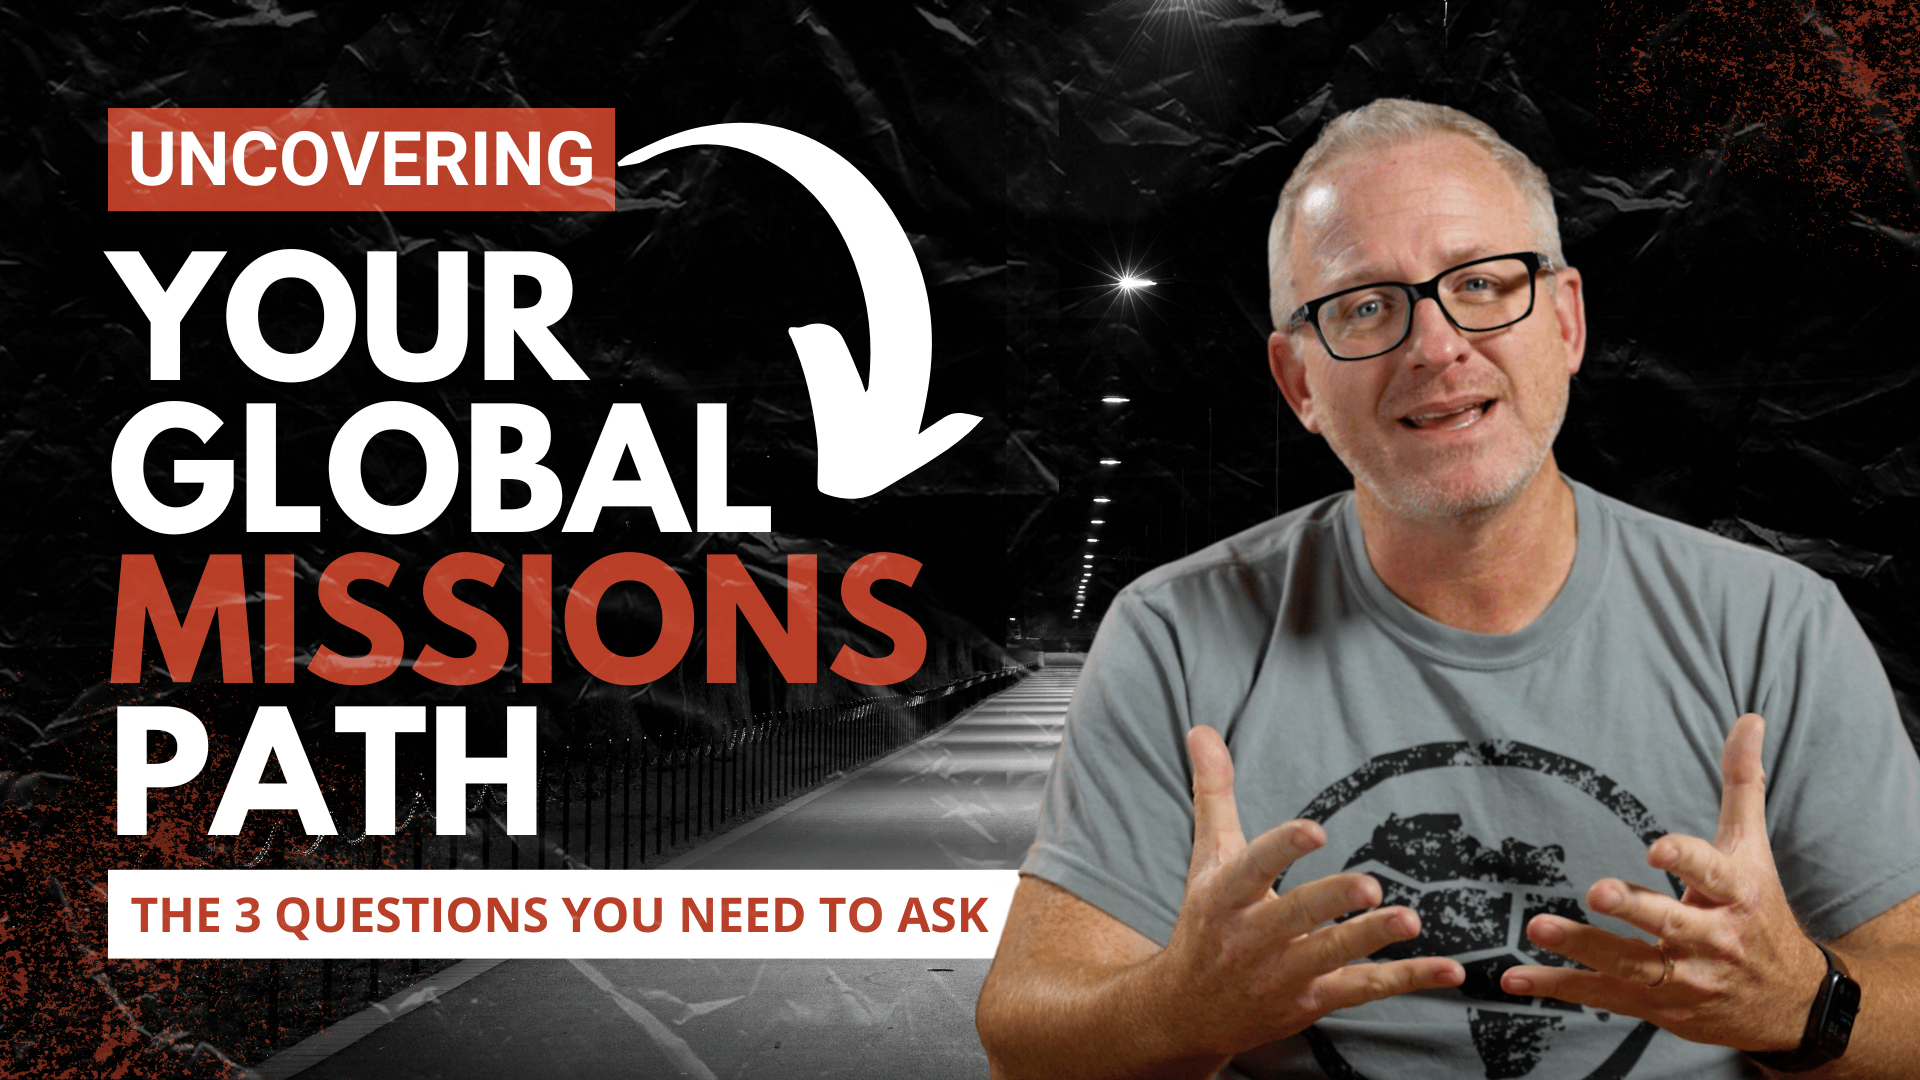 Uncovering Your Global Missions Path: The 3 Questions You Need to Ask